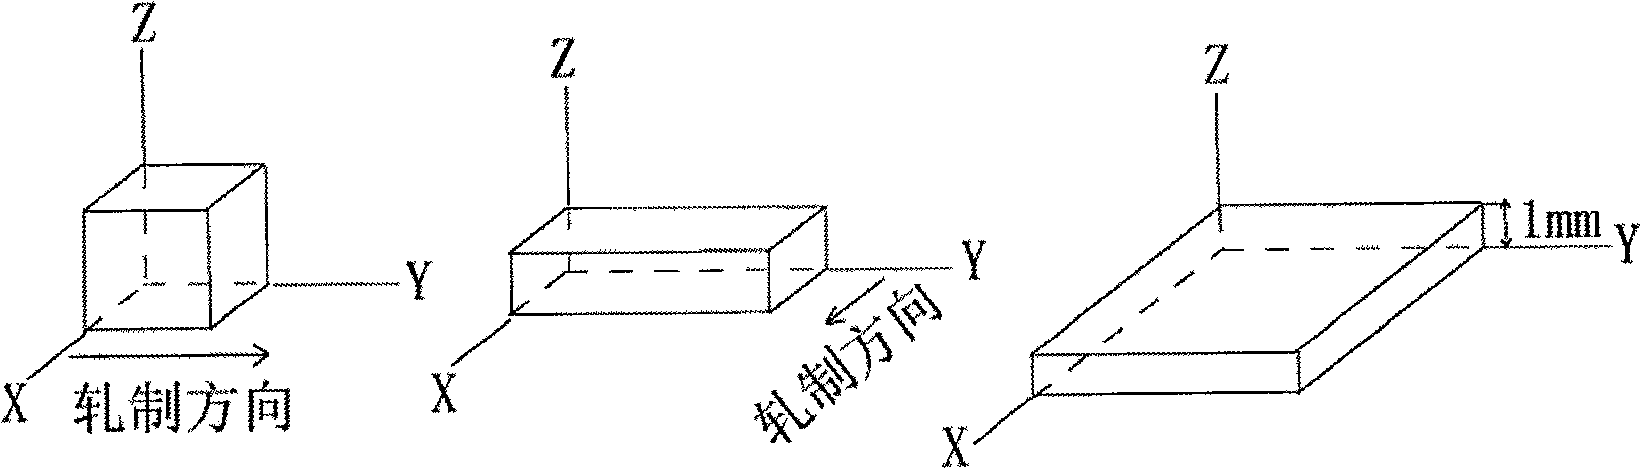 Moulding method of magnesium alloy ultrathin sheet material